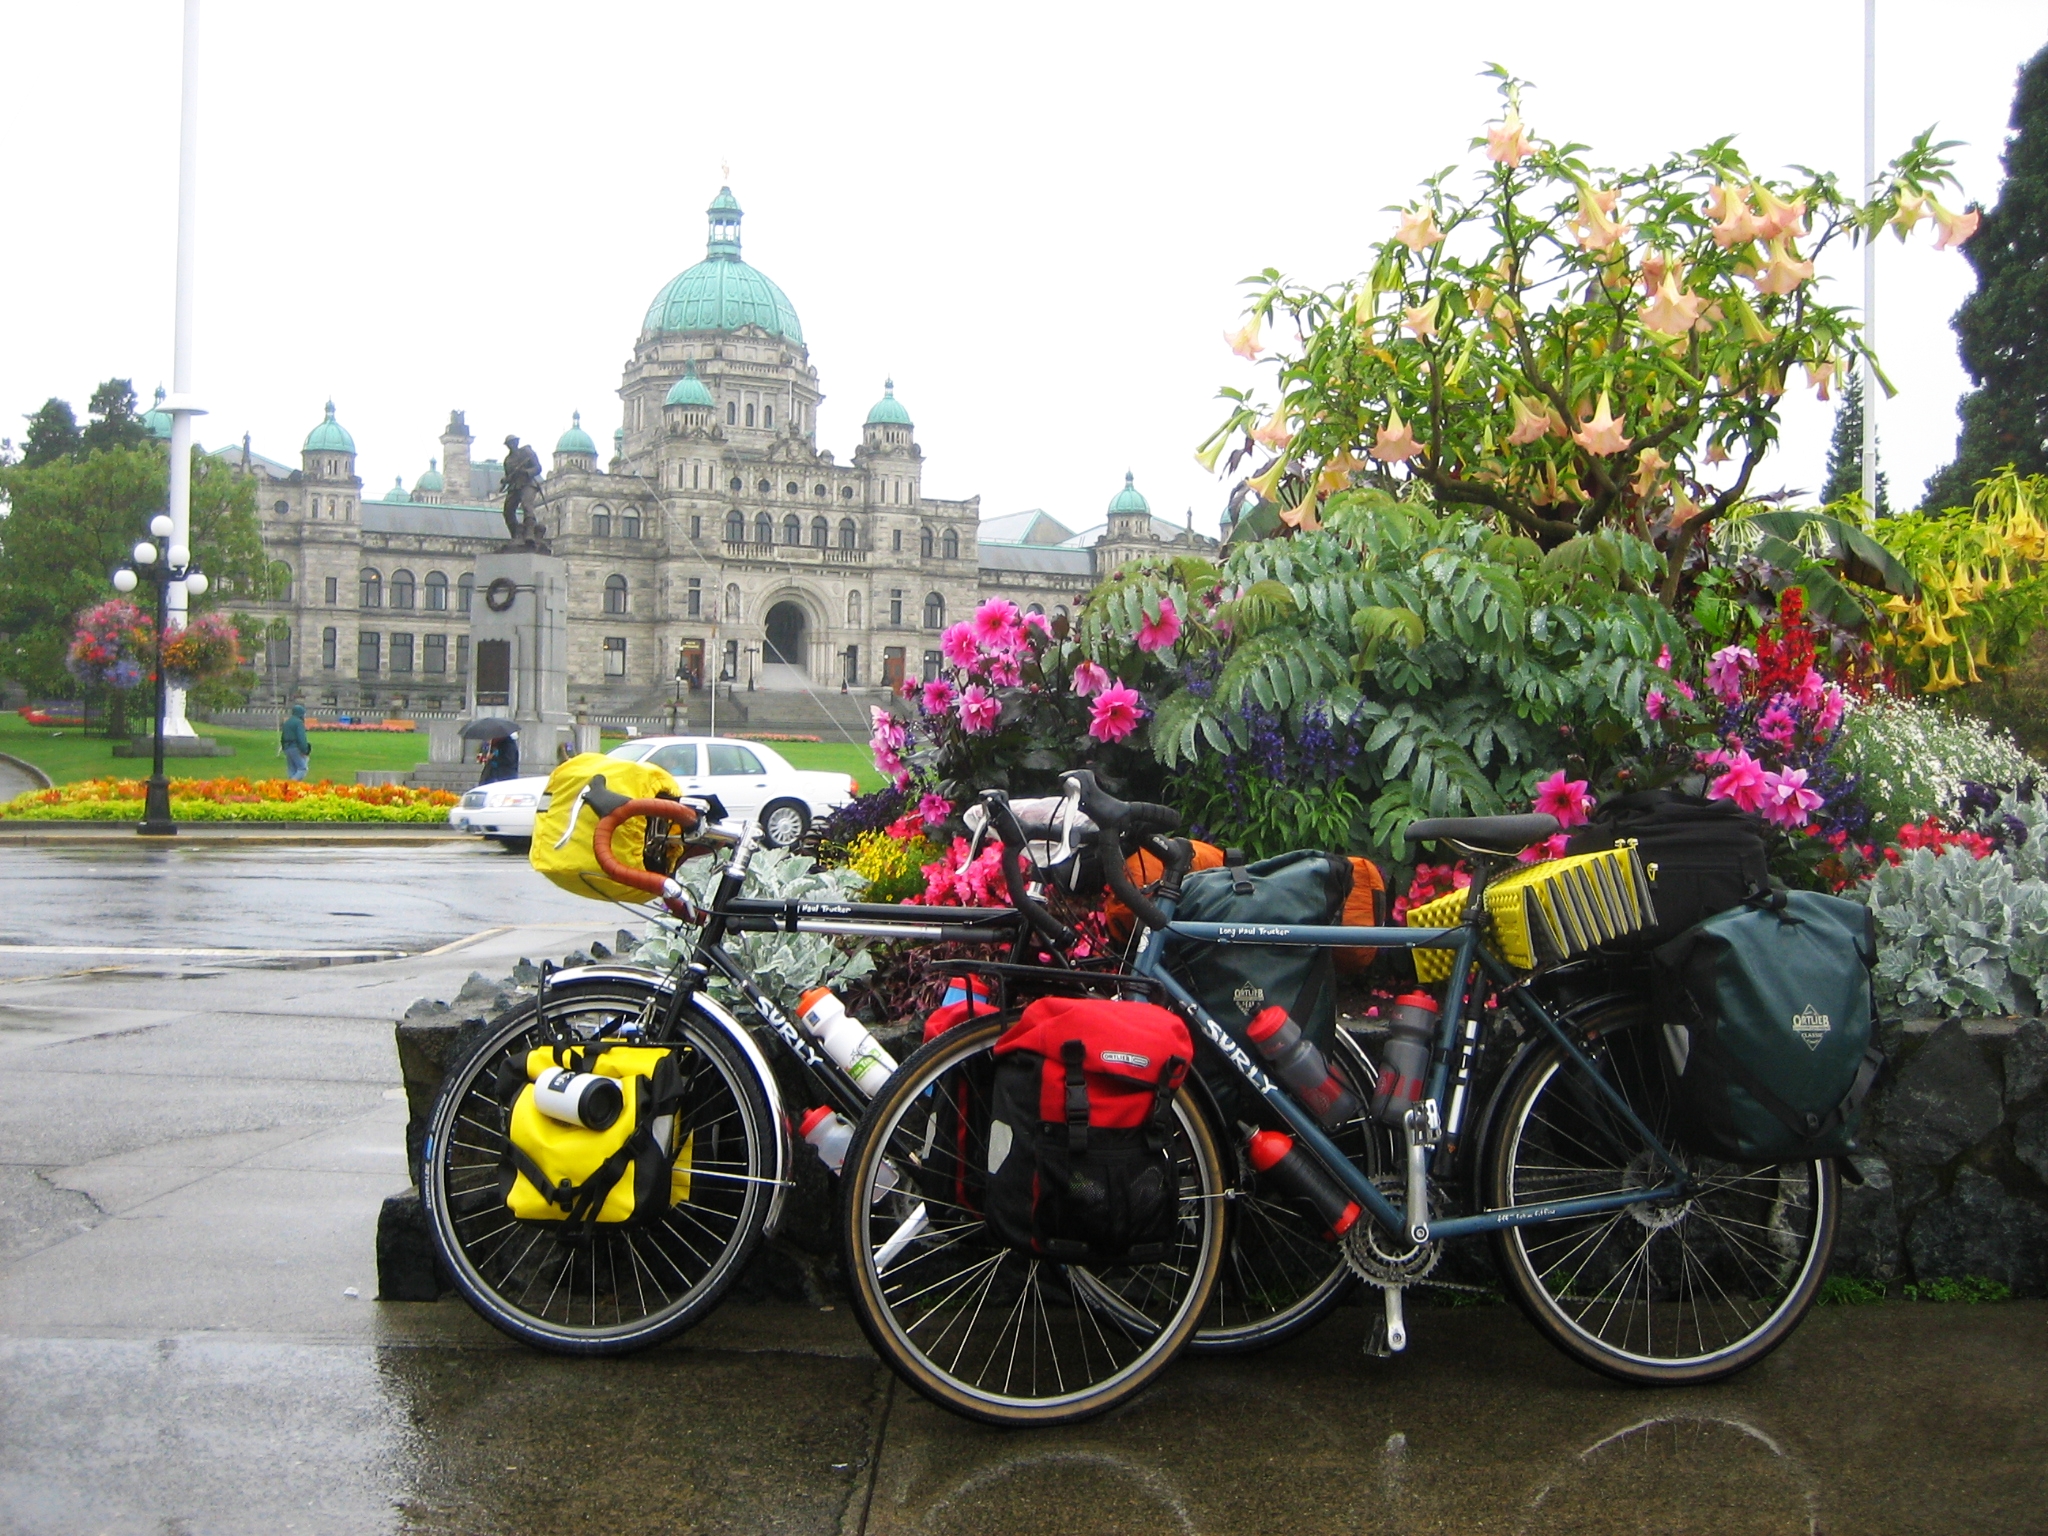 Touring bikes parked next to planter with famed Victoria landmark building - B.C. Parliament - in the background